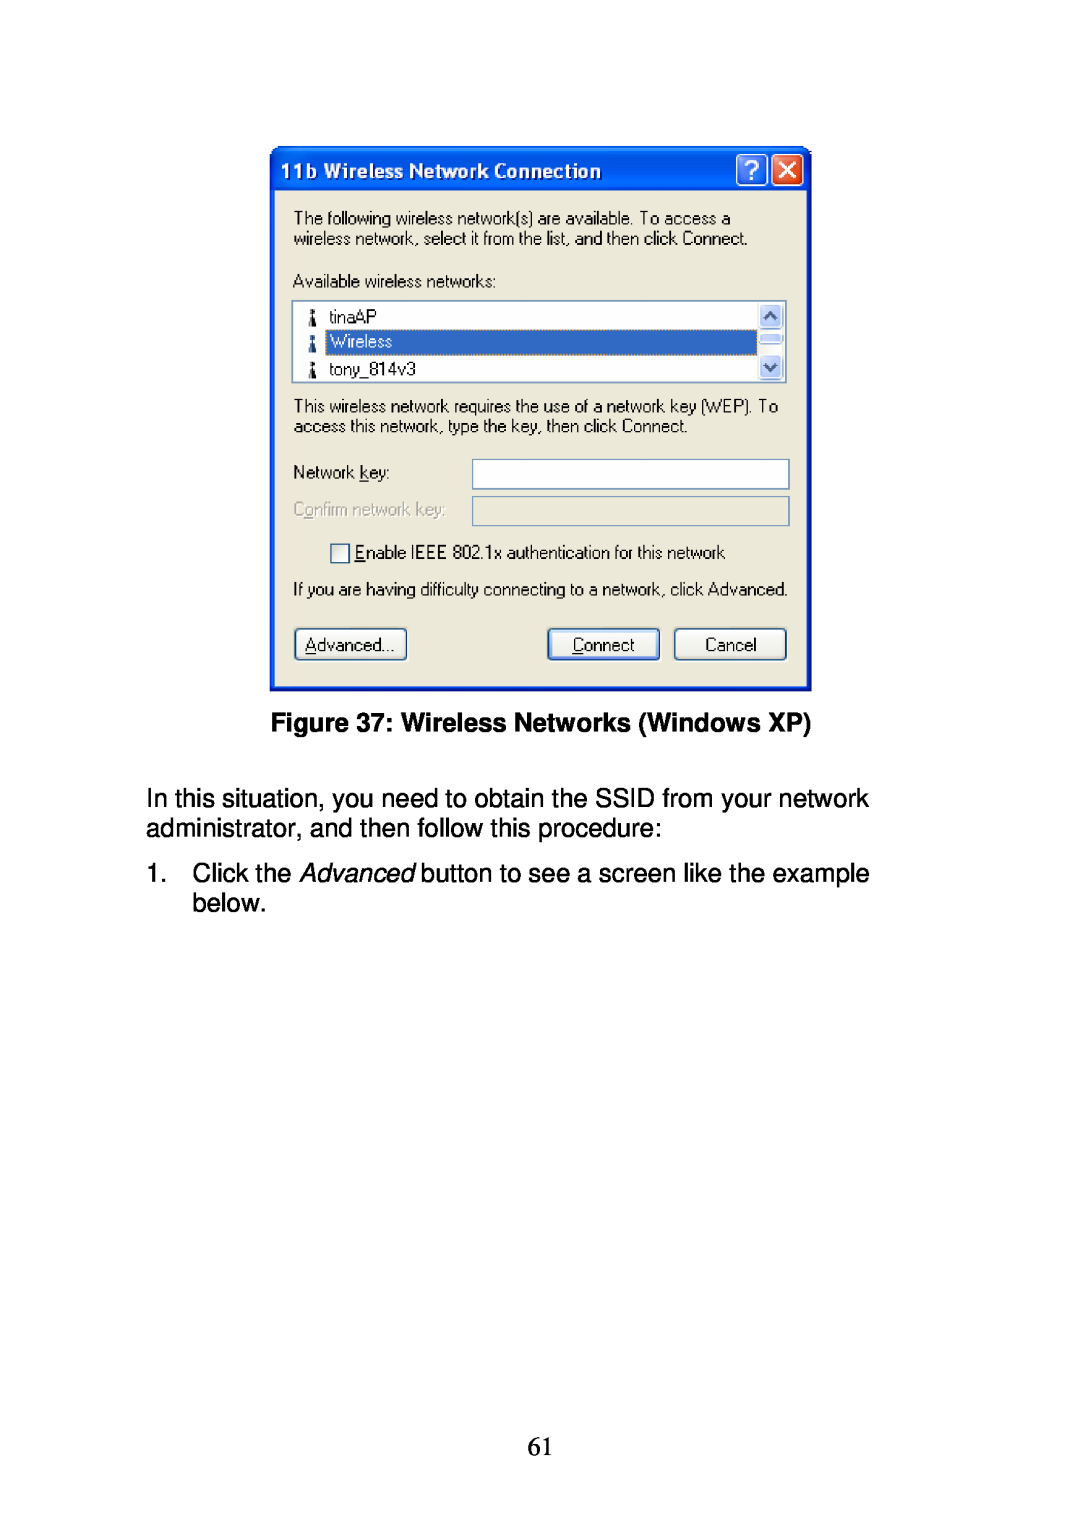 3Com WBR-6000 user manual Wireless Networks Windows XP, Click the Advanced button to see a screen like the example below 